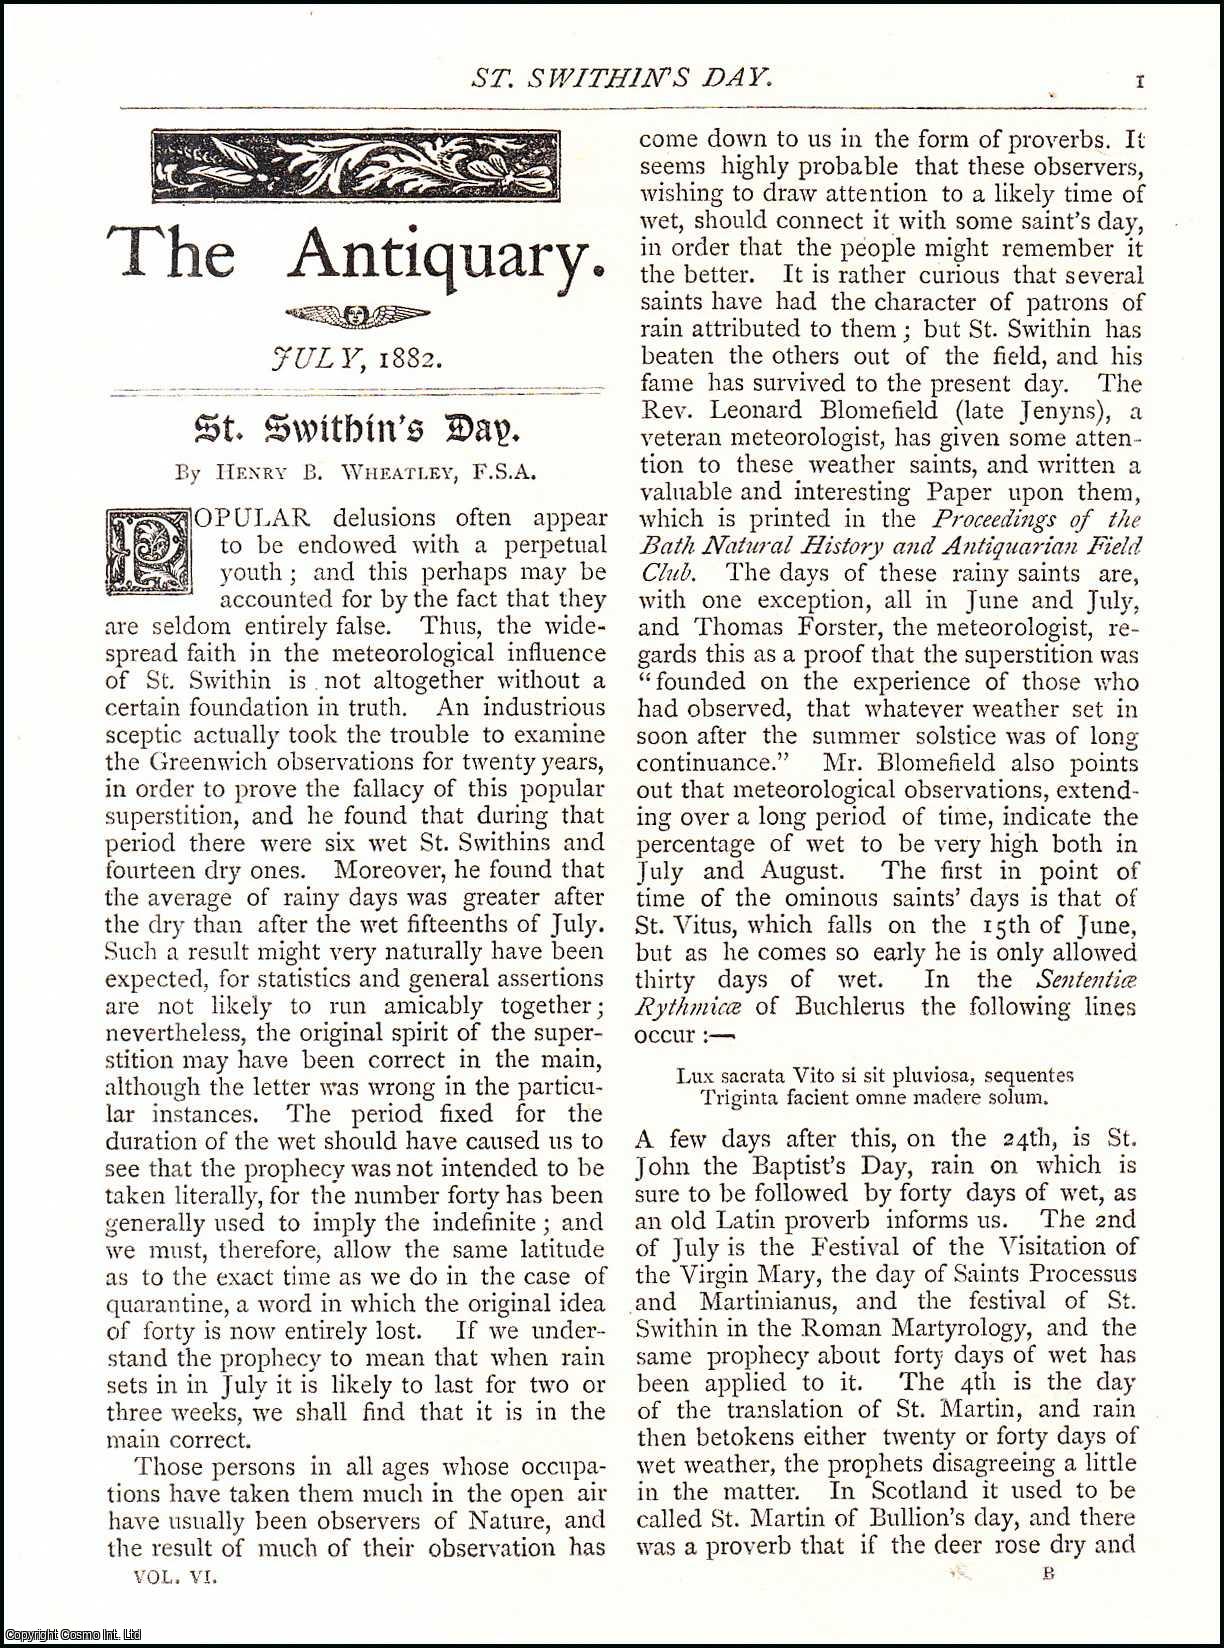 Henry B. Wheatley - St. Swithin's Day. An original article from The Antiquary Magazine, 1882.